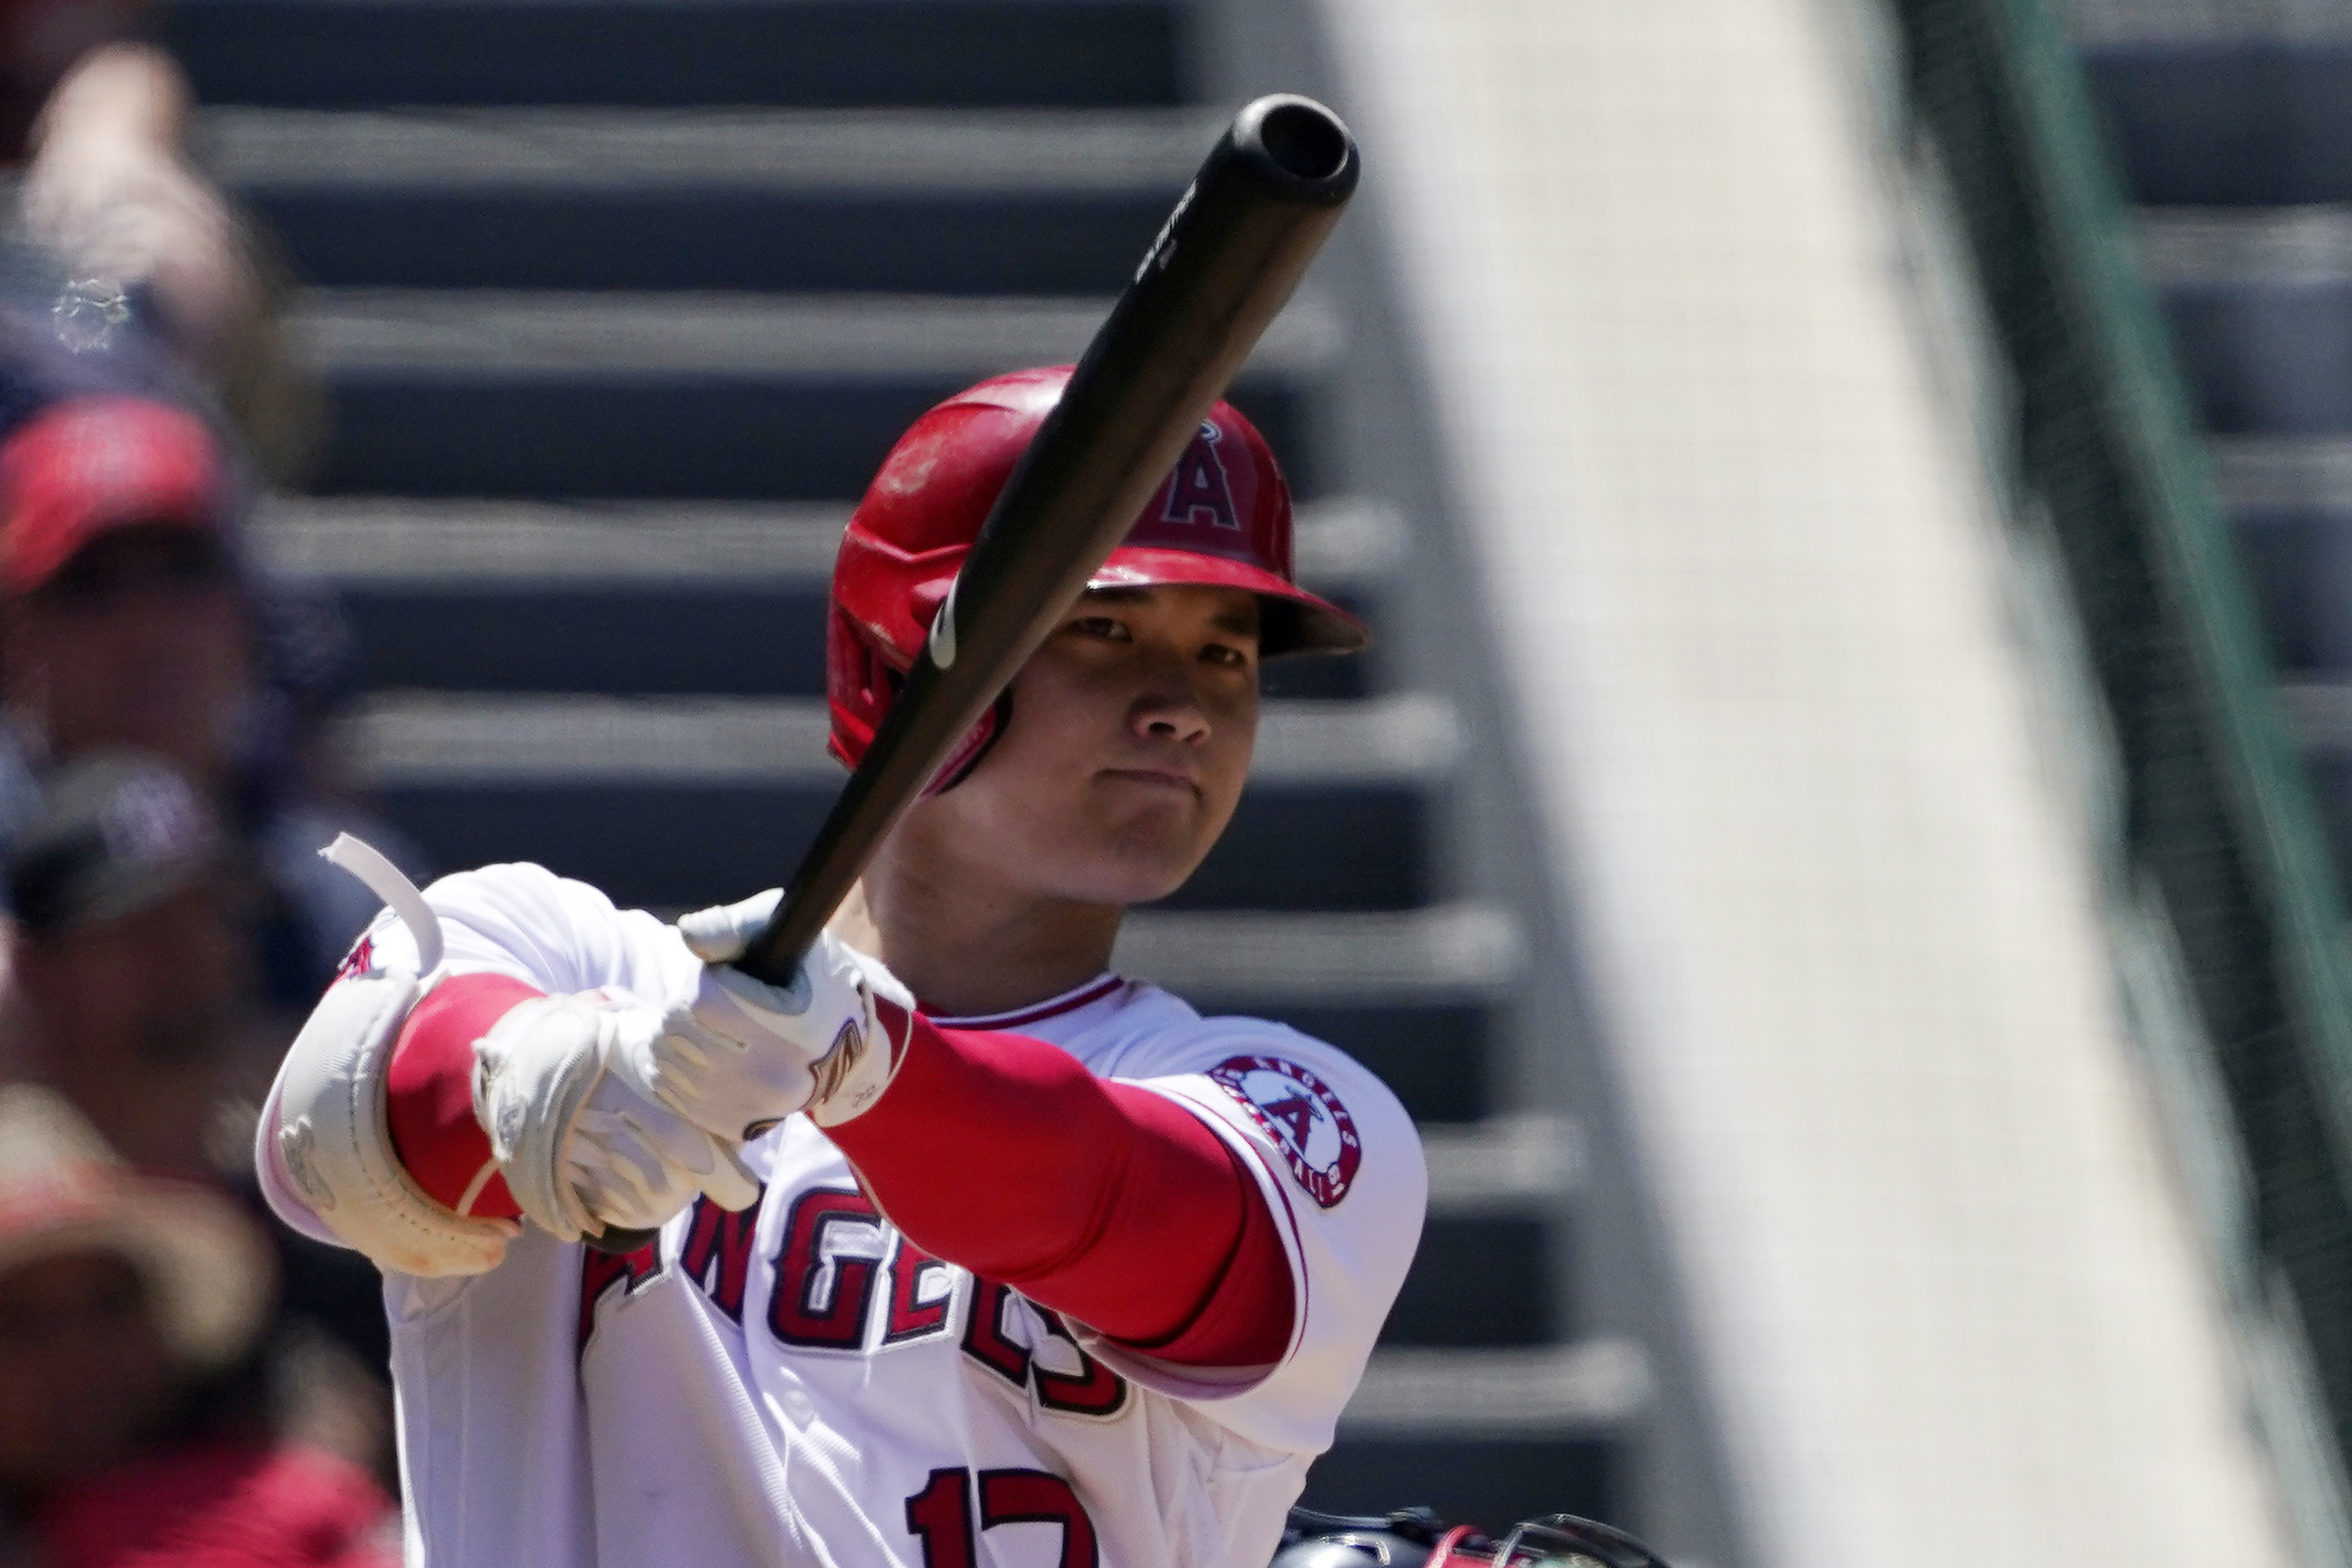 Is Babe Ruth the only player baseball has ever seen who compares with Shohei Ohtani? picture image